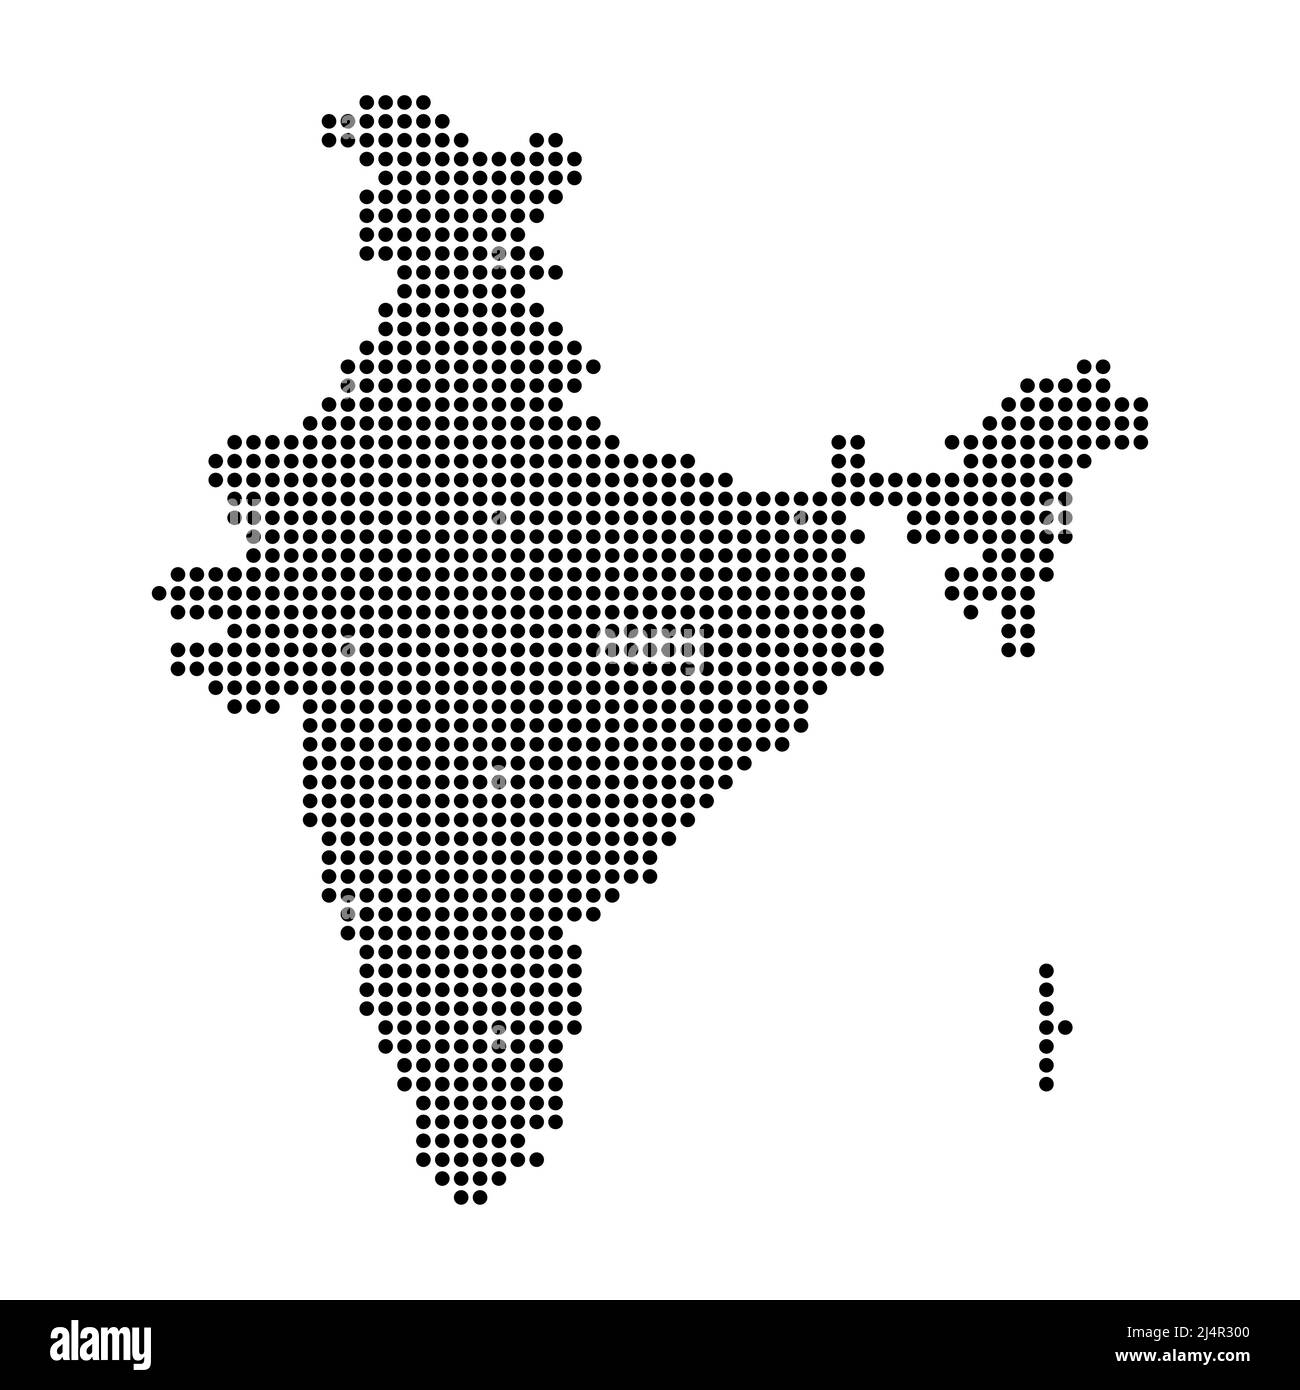 India map graphic, travel geography icon, nation country indian atlas region, vector illustration . Stock Vector